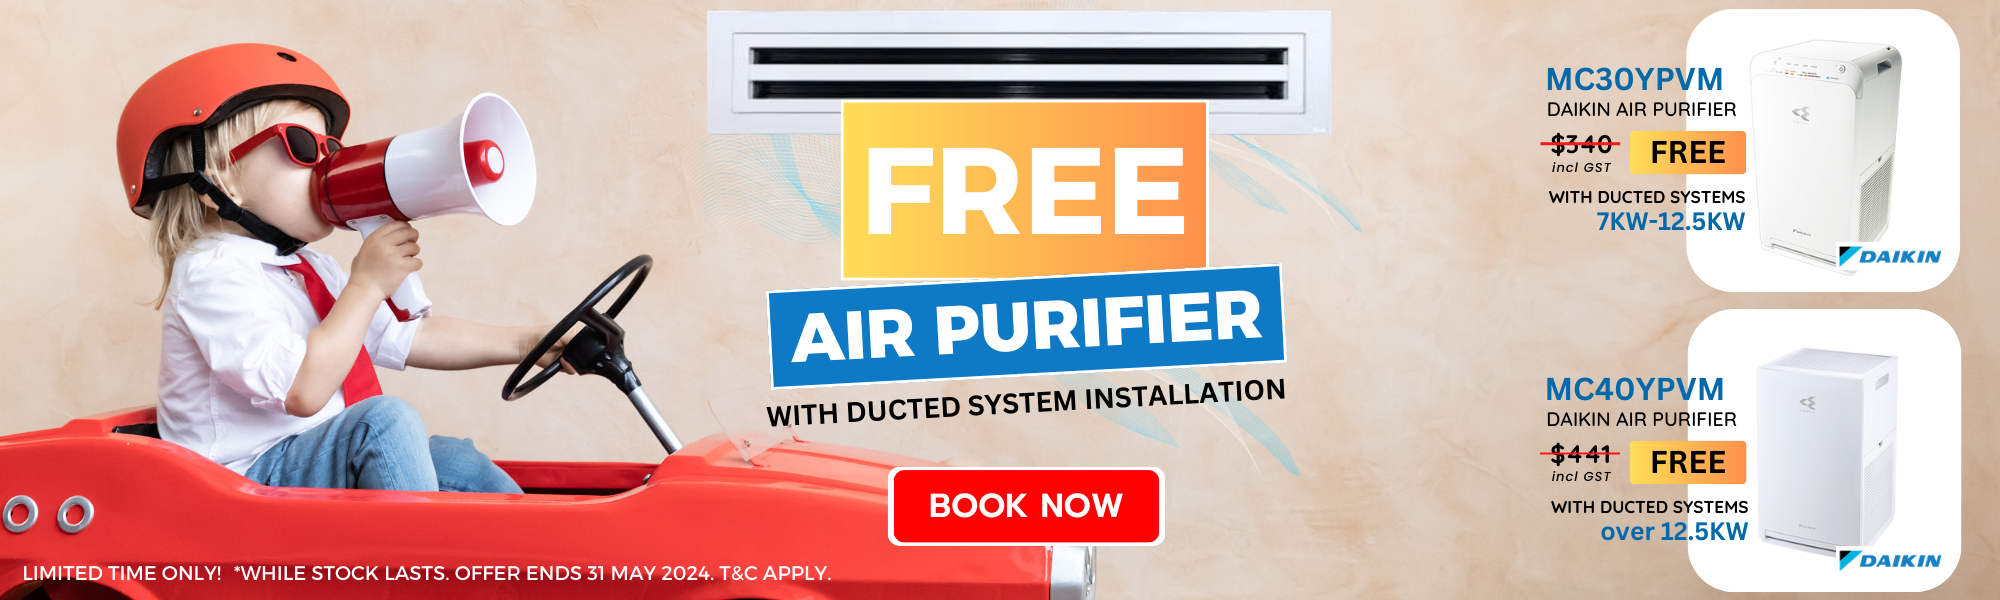 Free air purifier with ducted installation